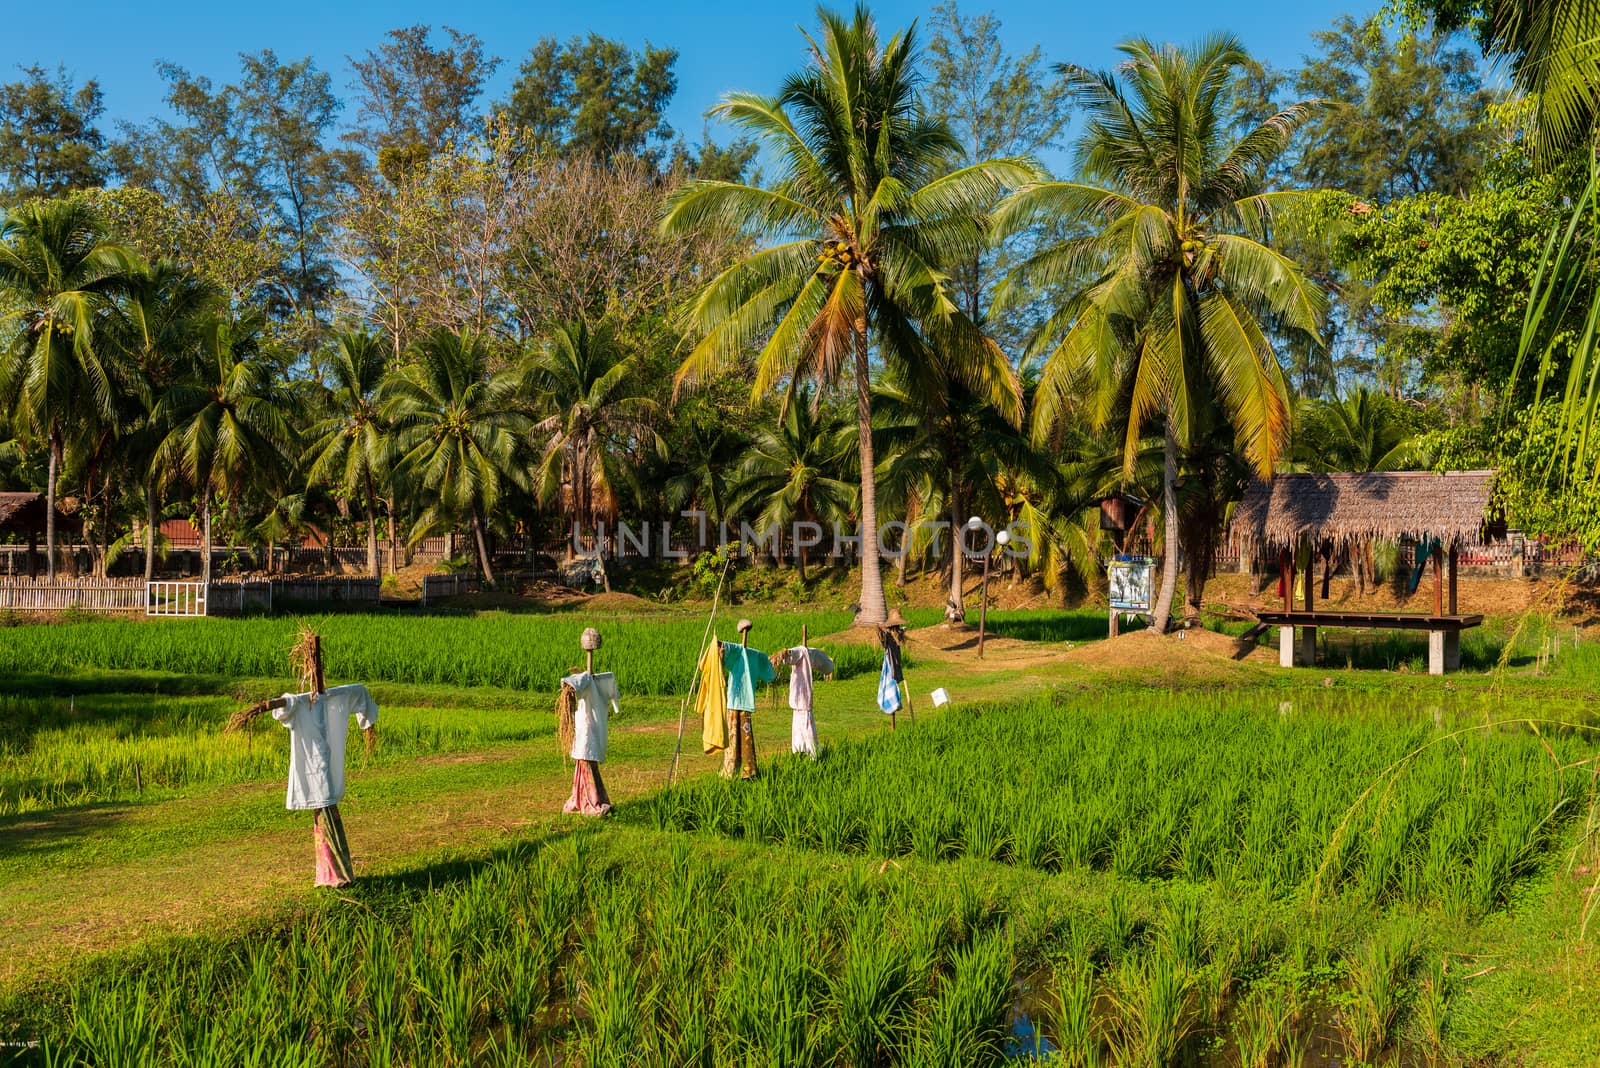 Scarecrows in a Rice Paddy by jfbenning